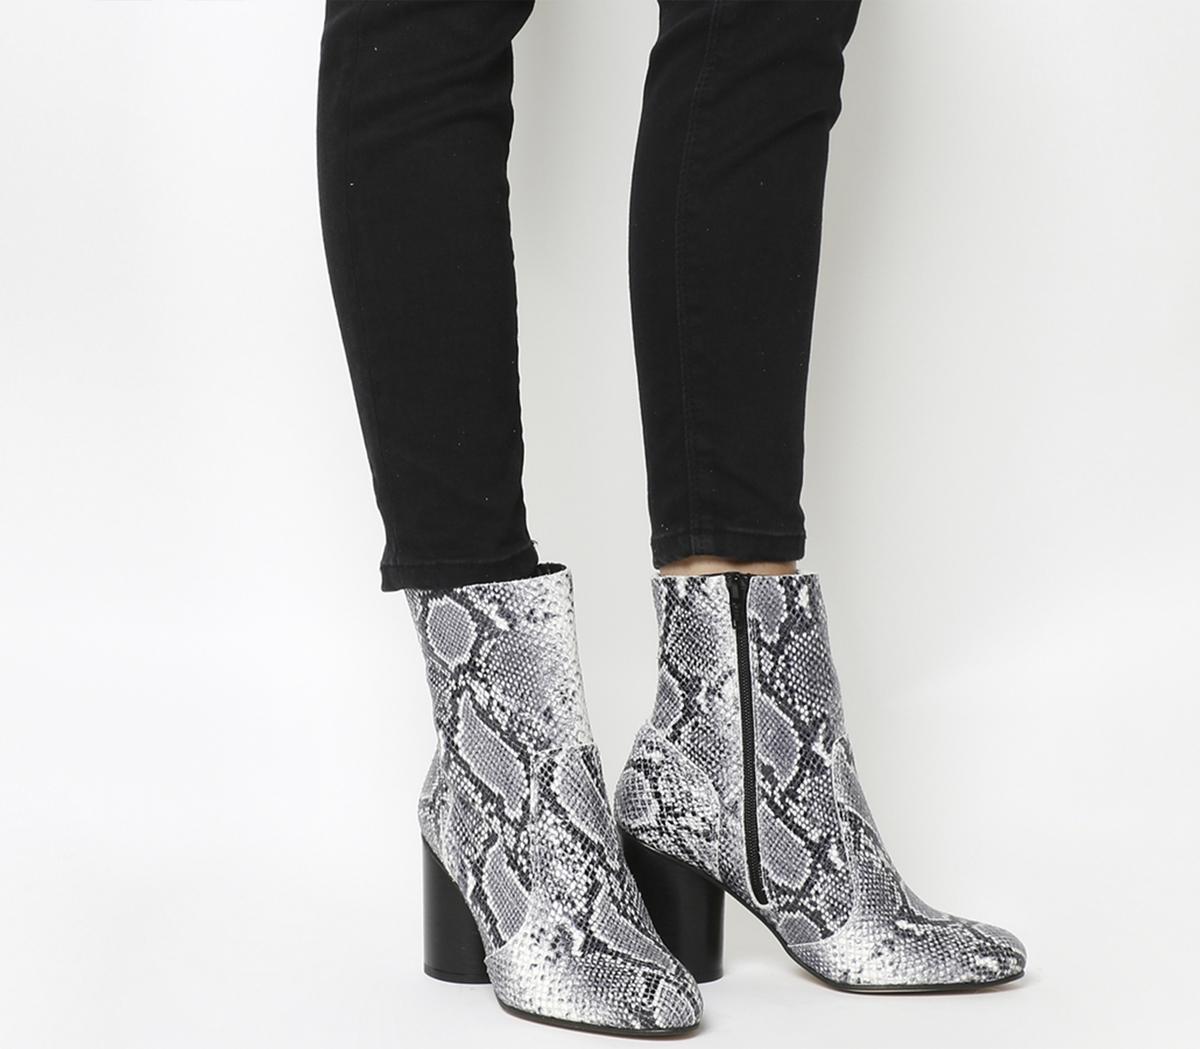 OFFICEIda Cylindrical Heel BootsBlack And White Snake Embossed Leather